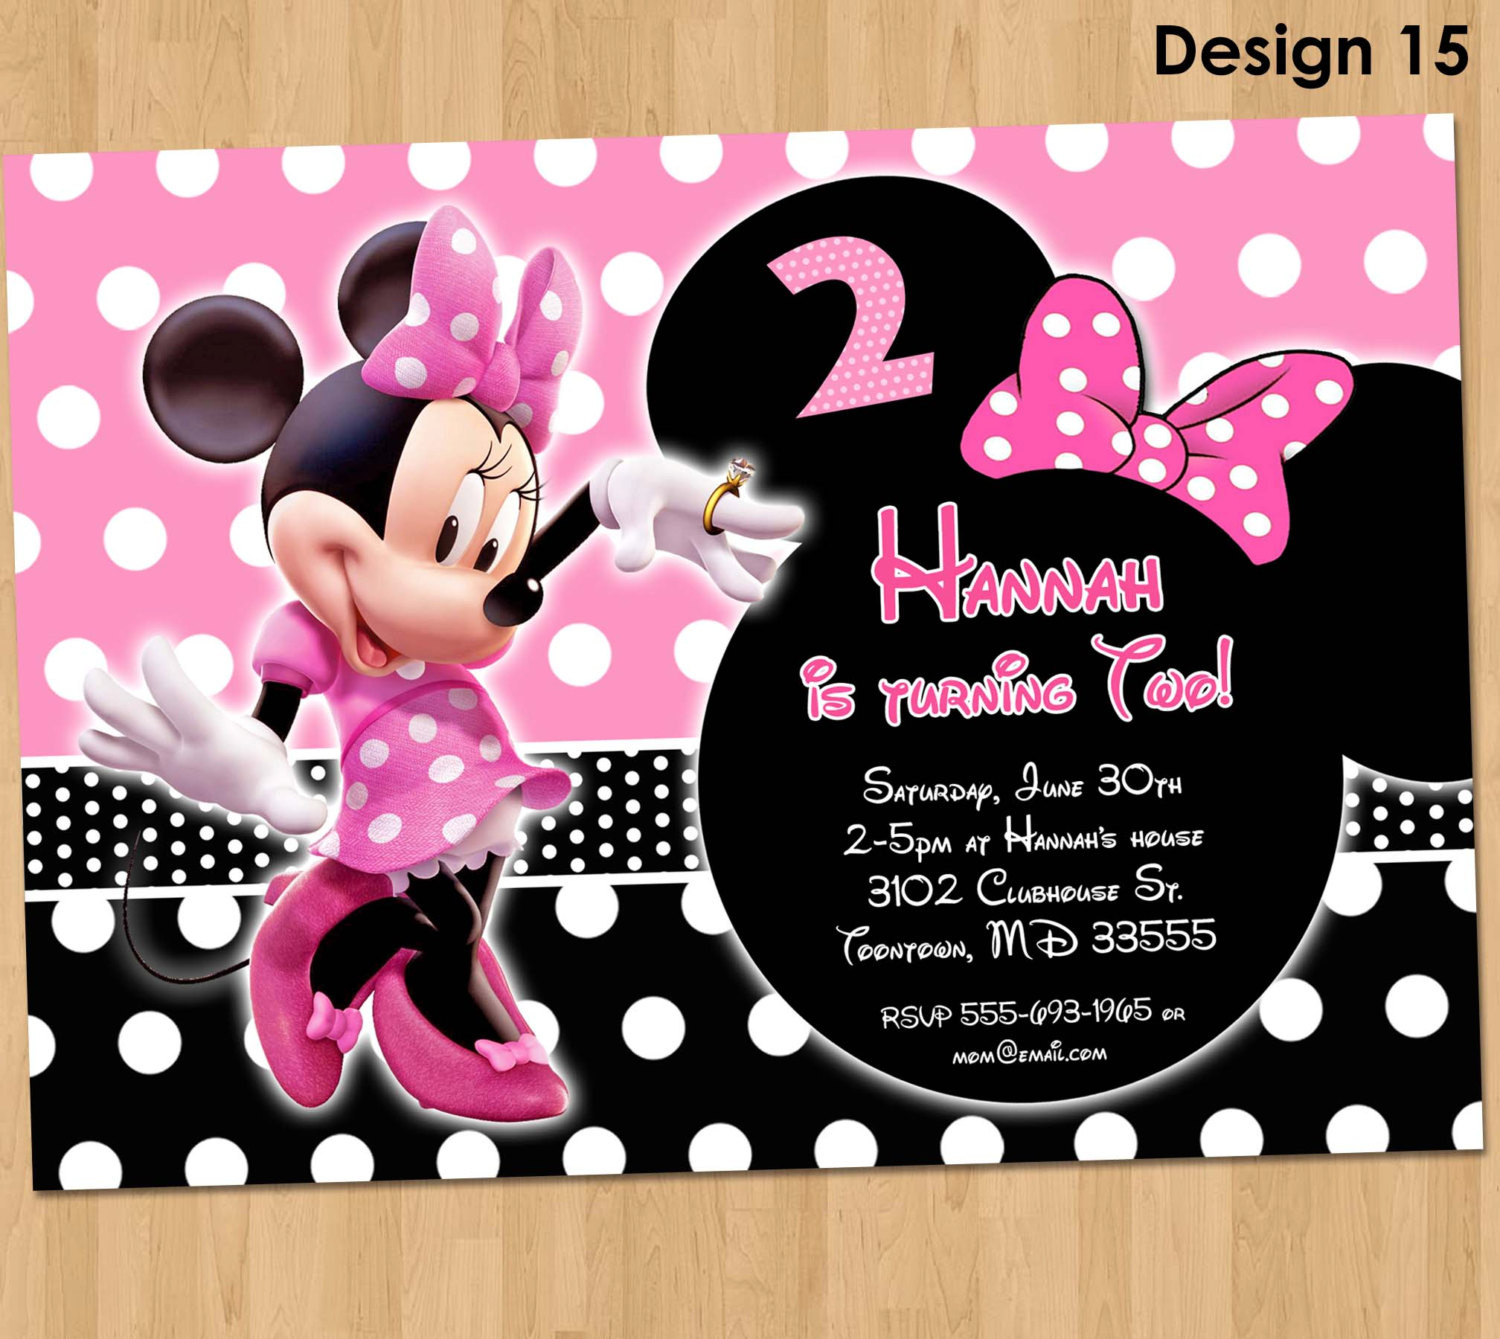 Minnie Mouse Birthday Invitations Personalized
 Minnie Mouse Invitation Minnie Mouse Birthday Invitation